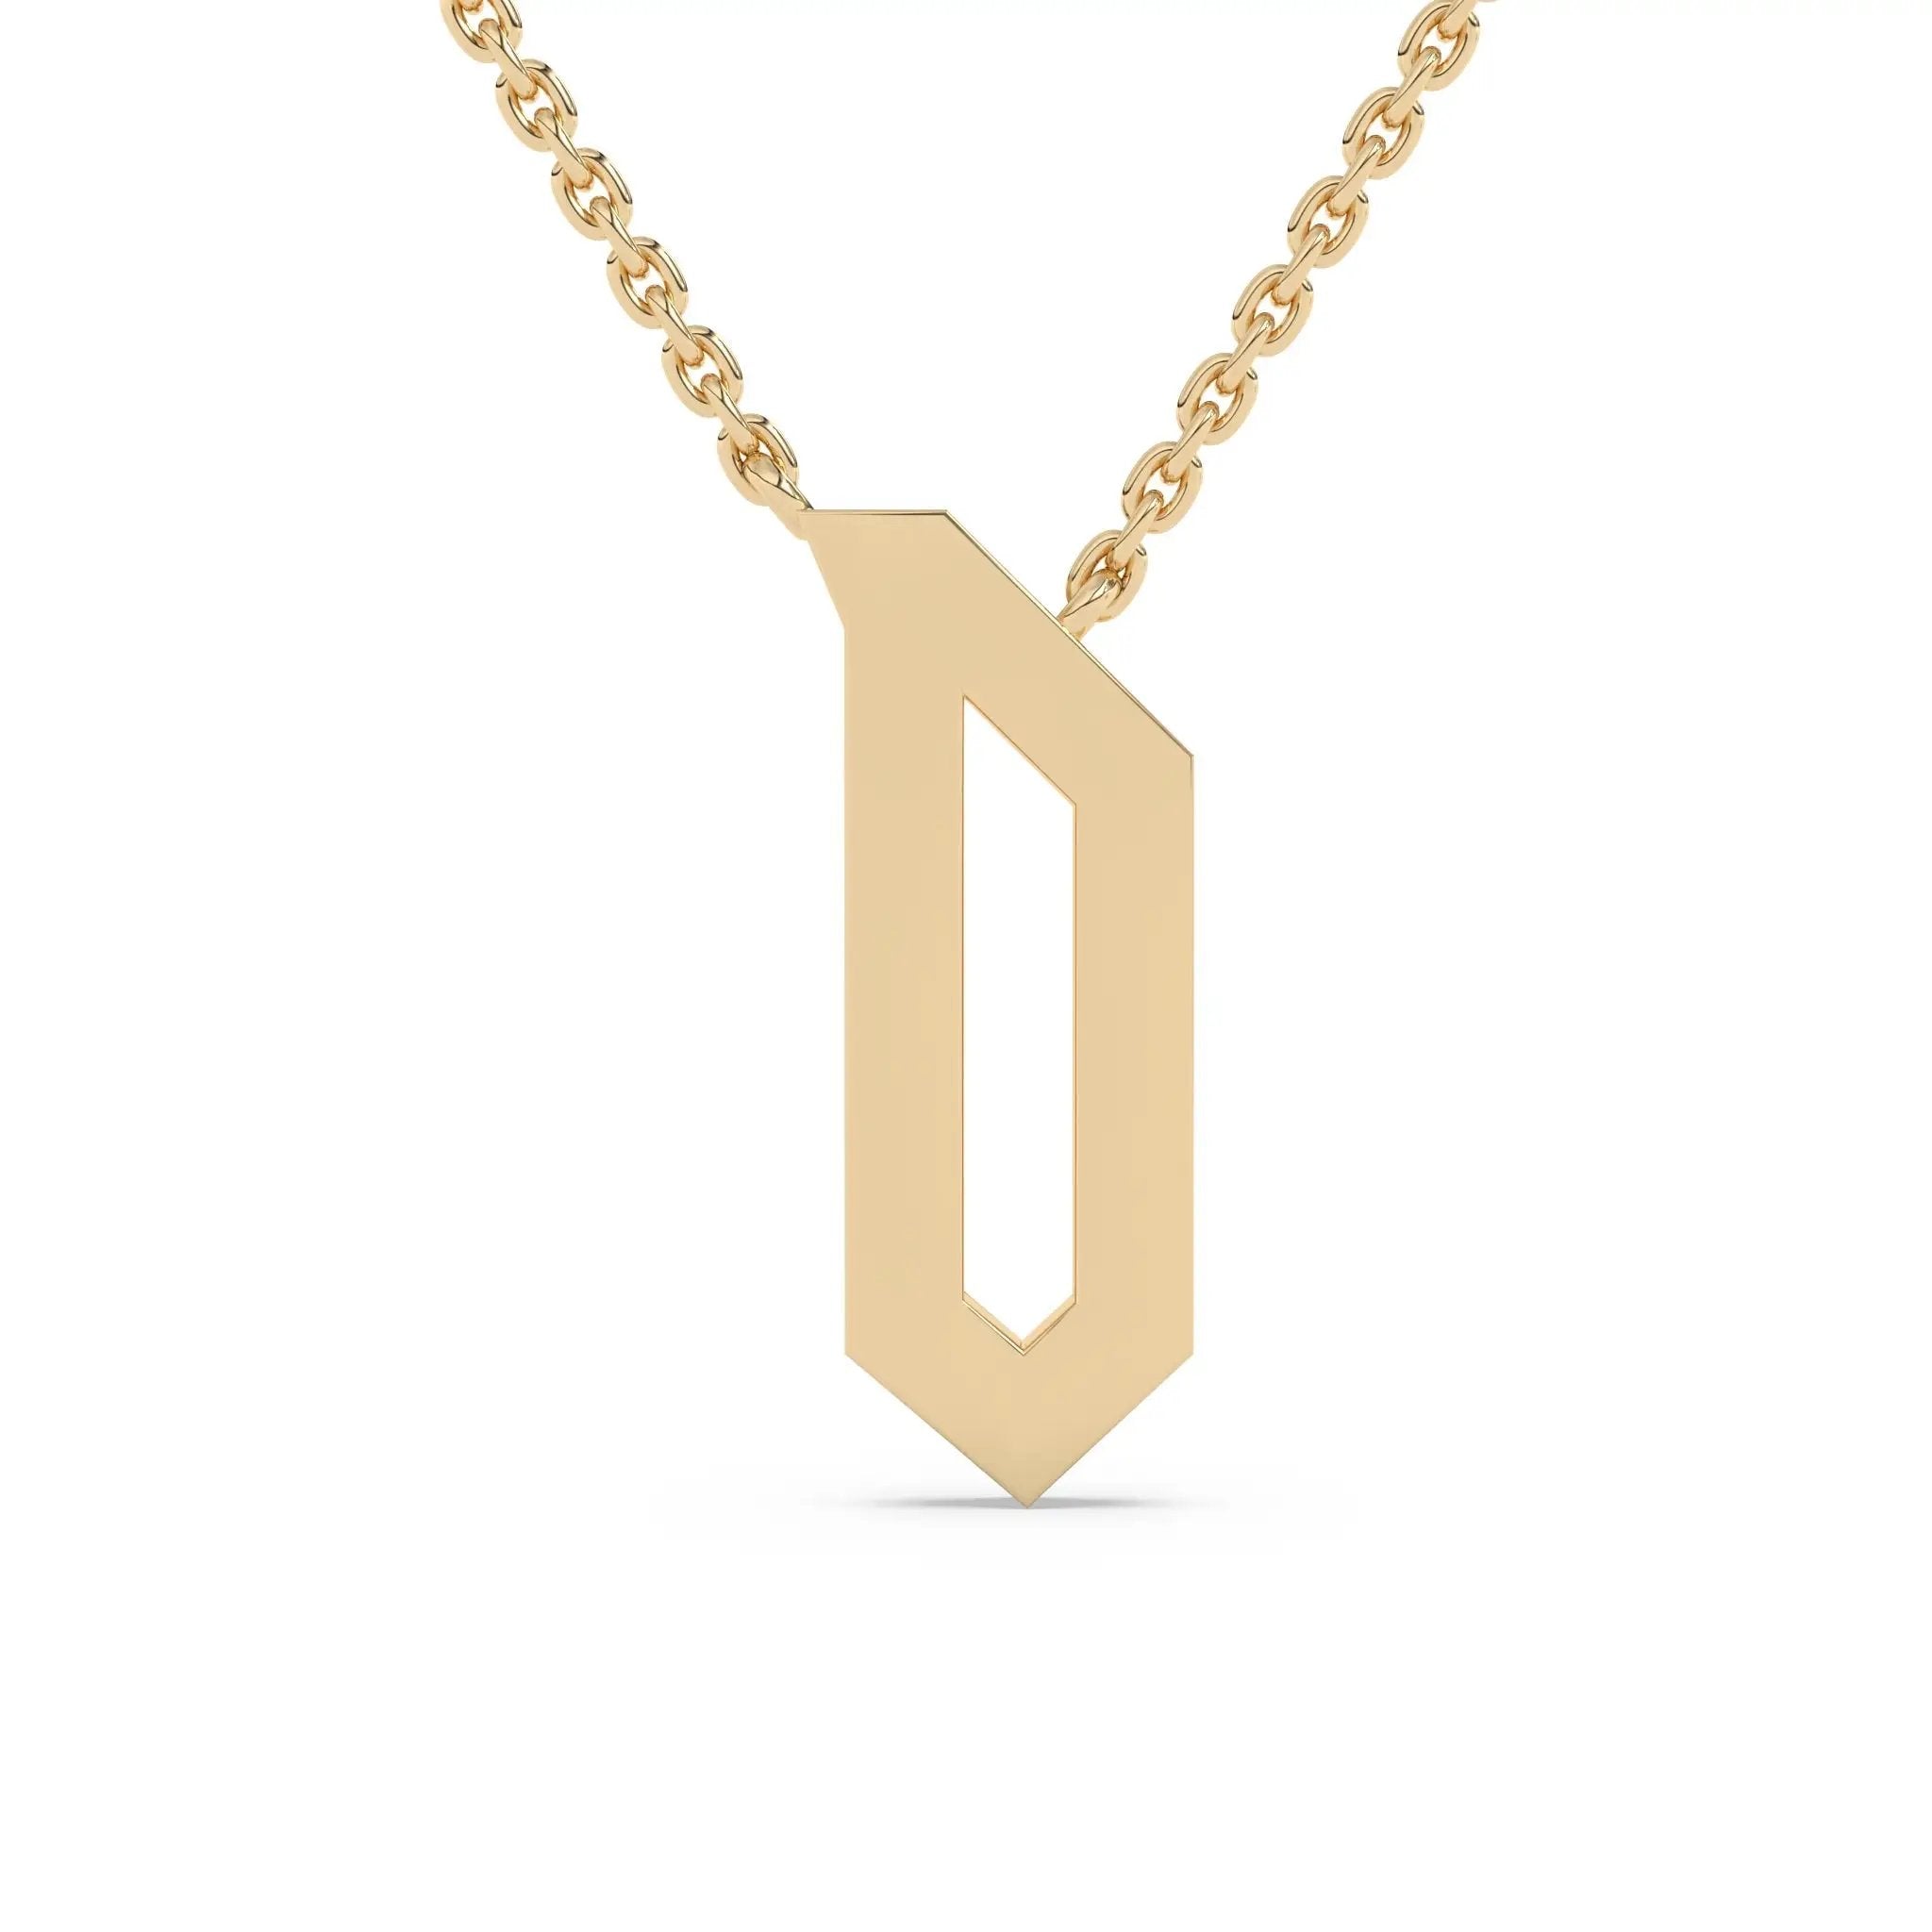 Golden Initial L Necklace – Wonther